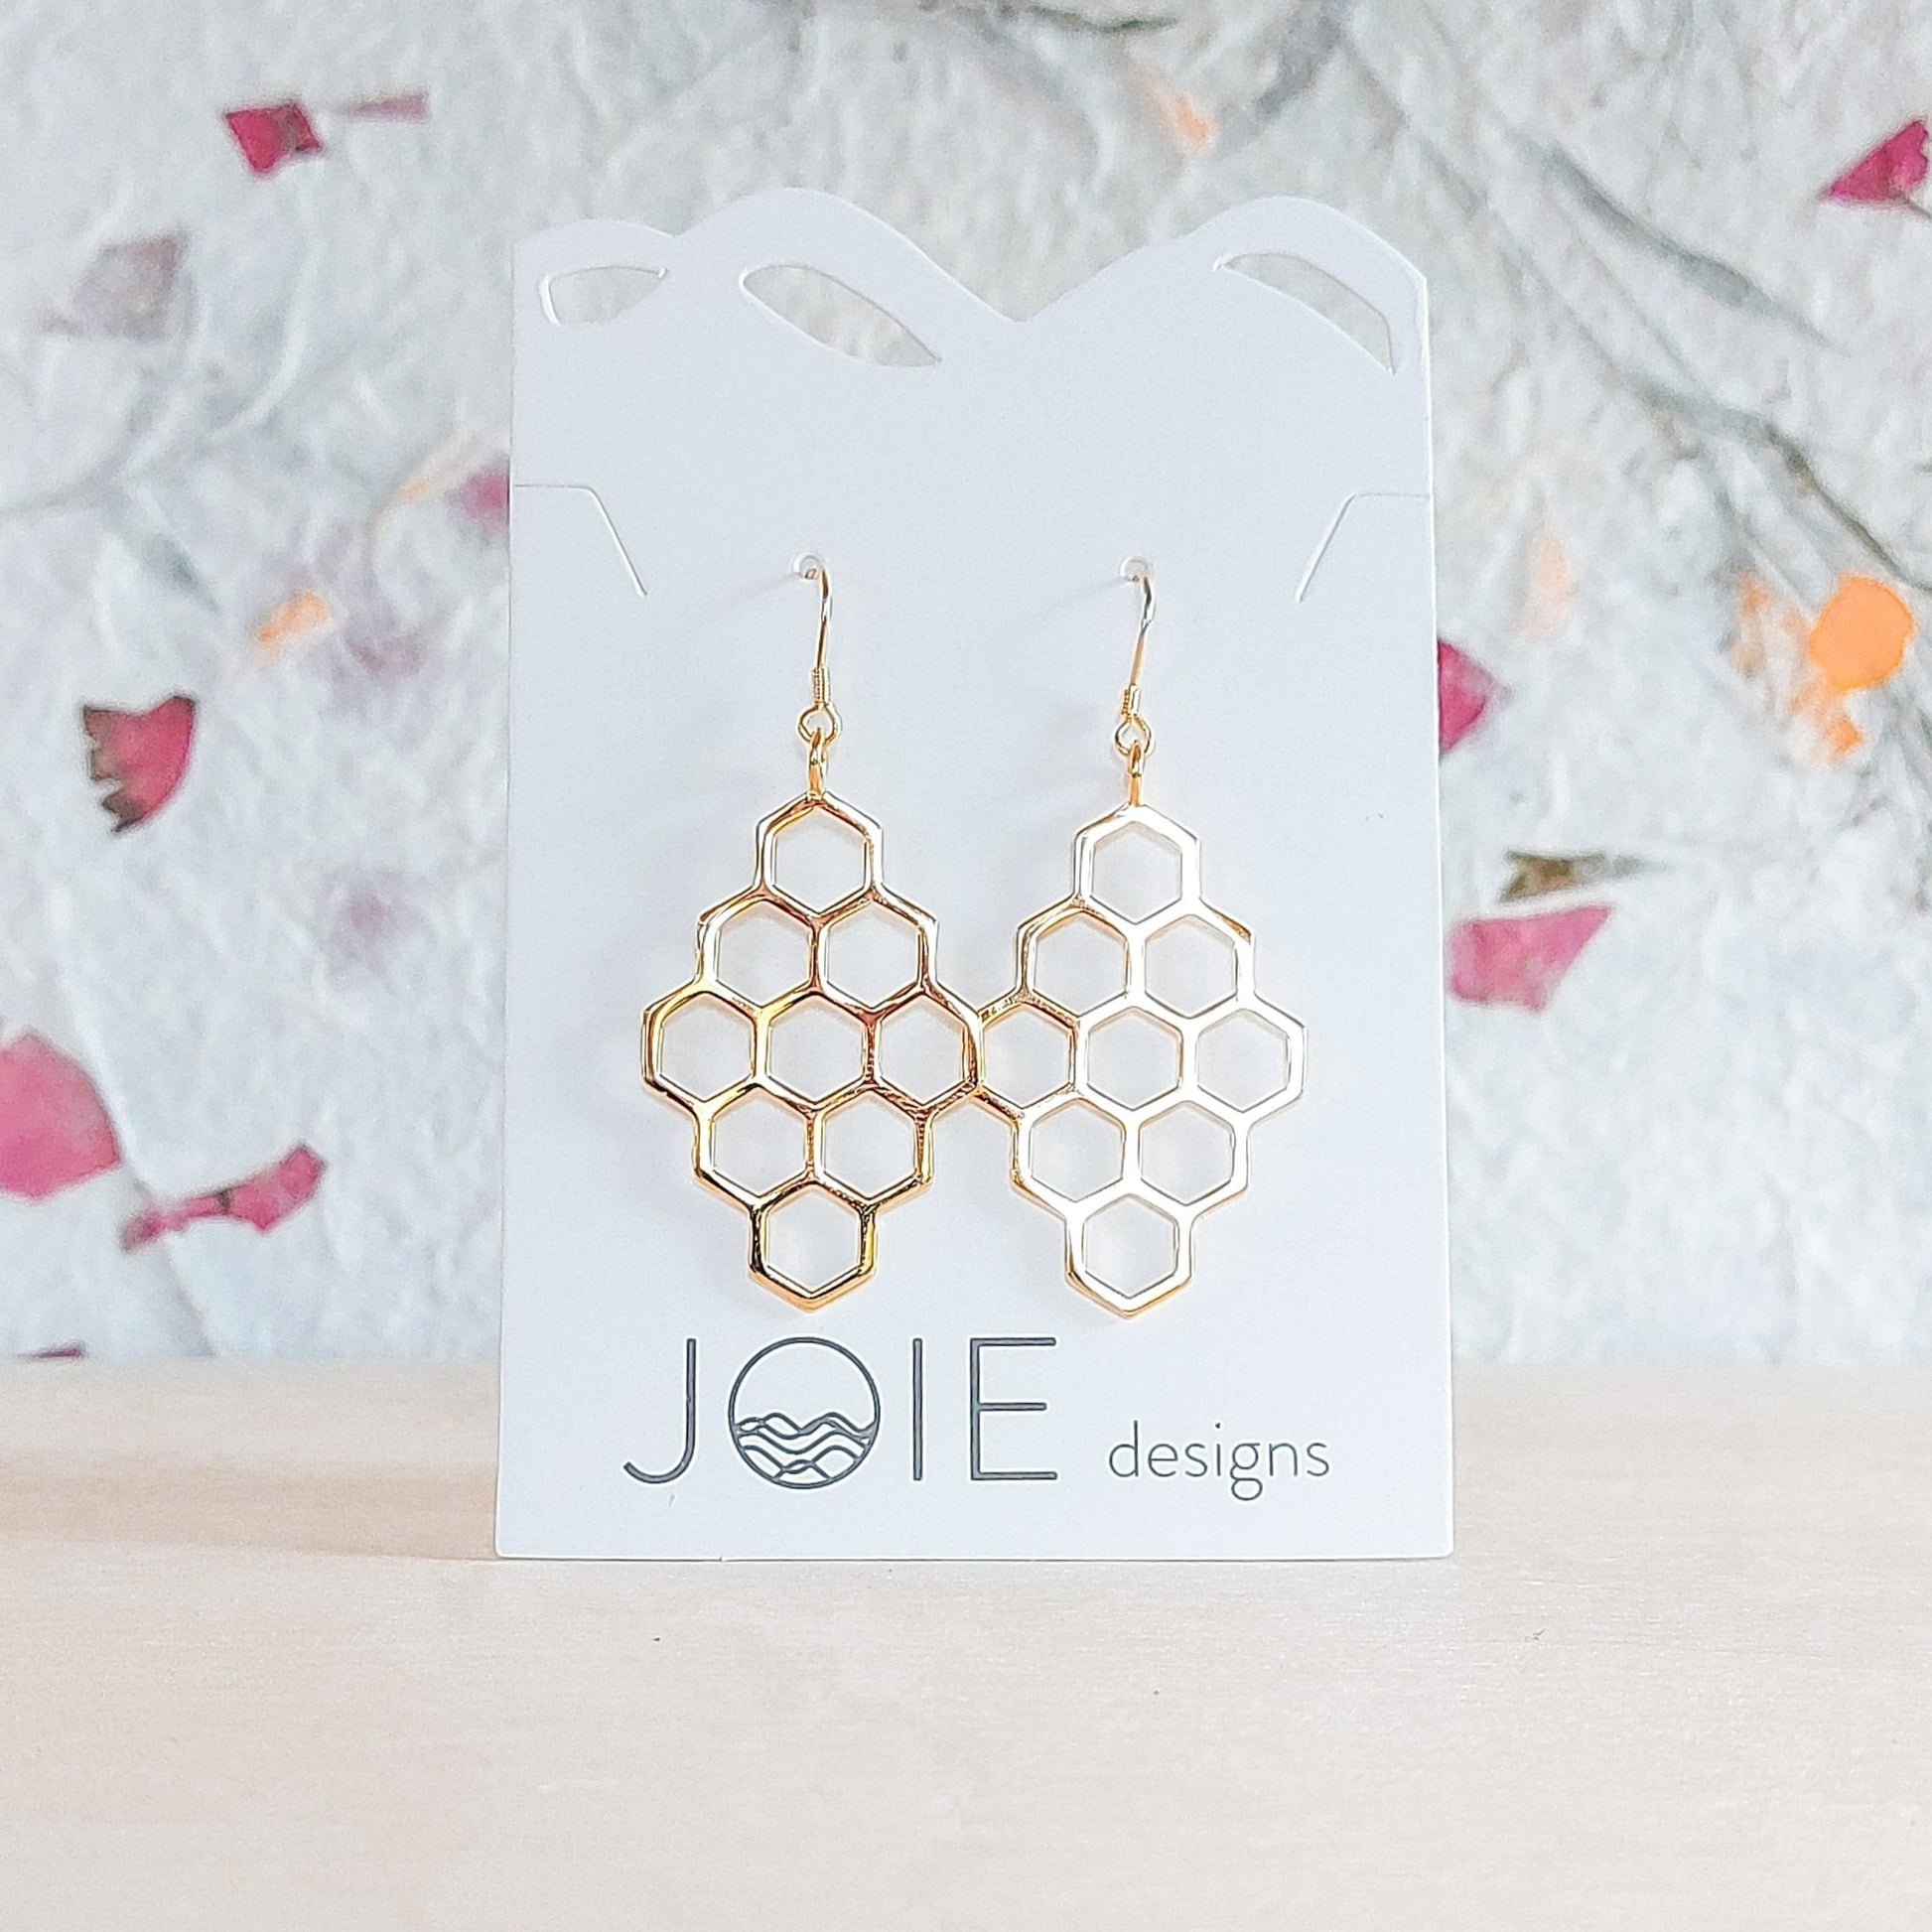 18k plated yellow gold plate diamond-shaped honeycomb  drop earrings shown on jewelry card with wildflower paper background